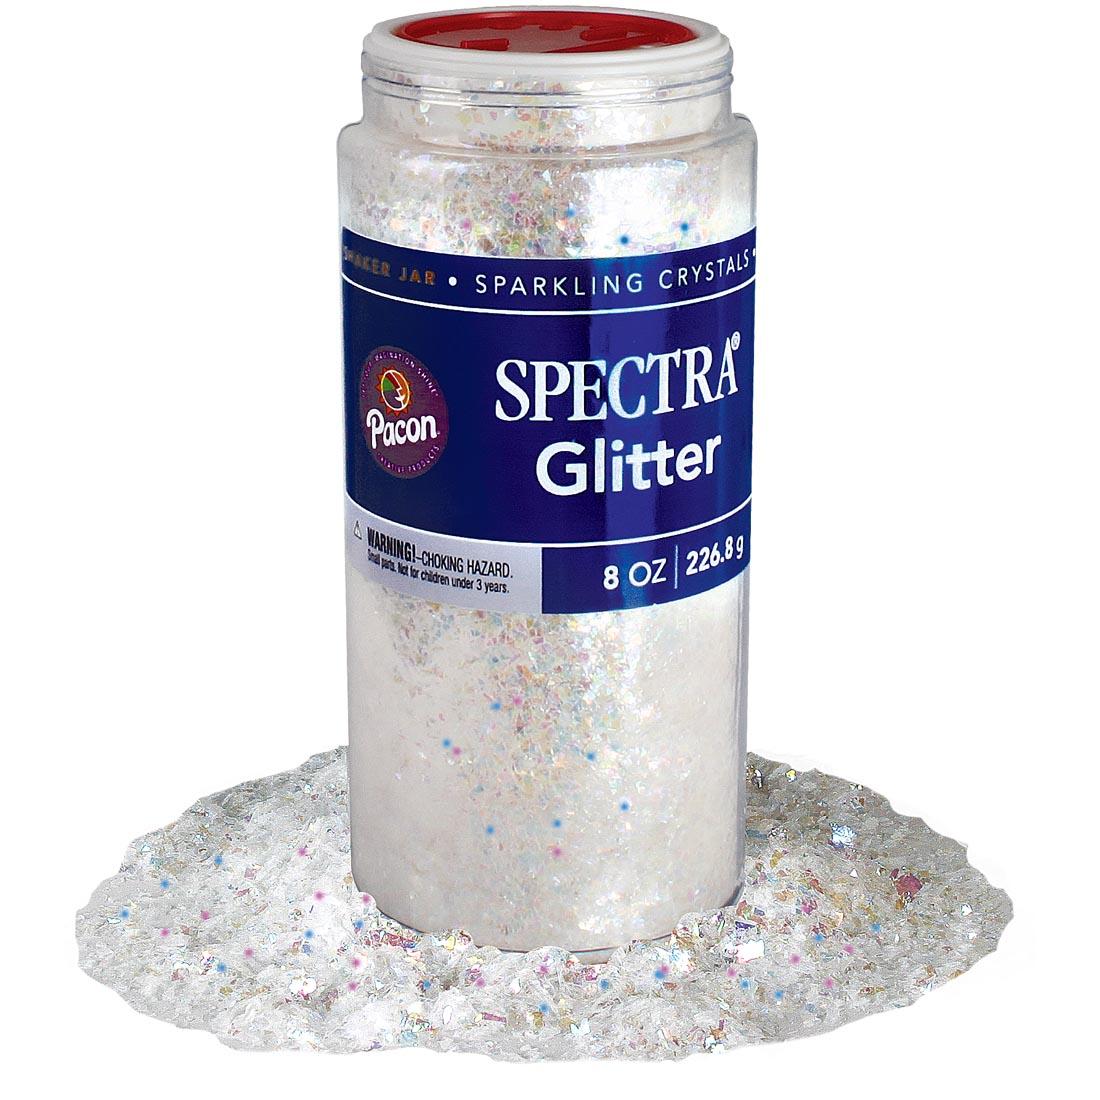 jar of Spectra Random Disco Glitter Flakes sitting in a pile of flakes